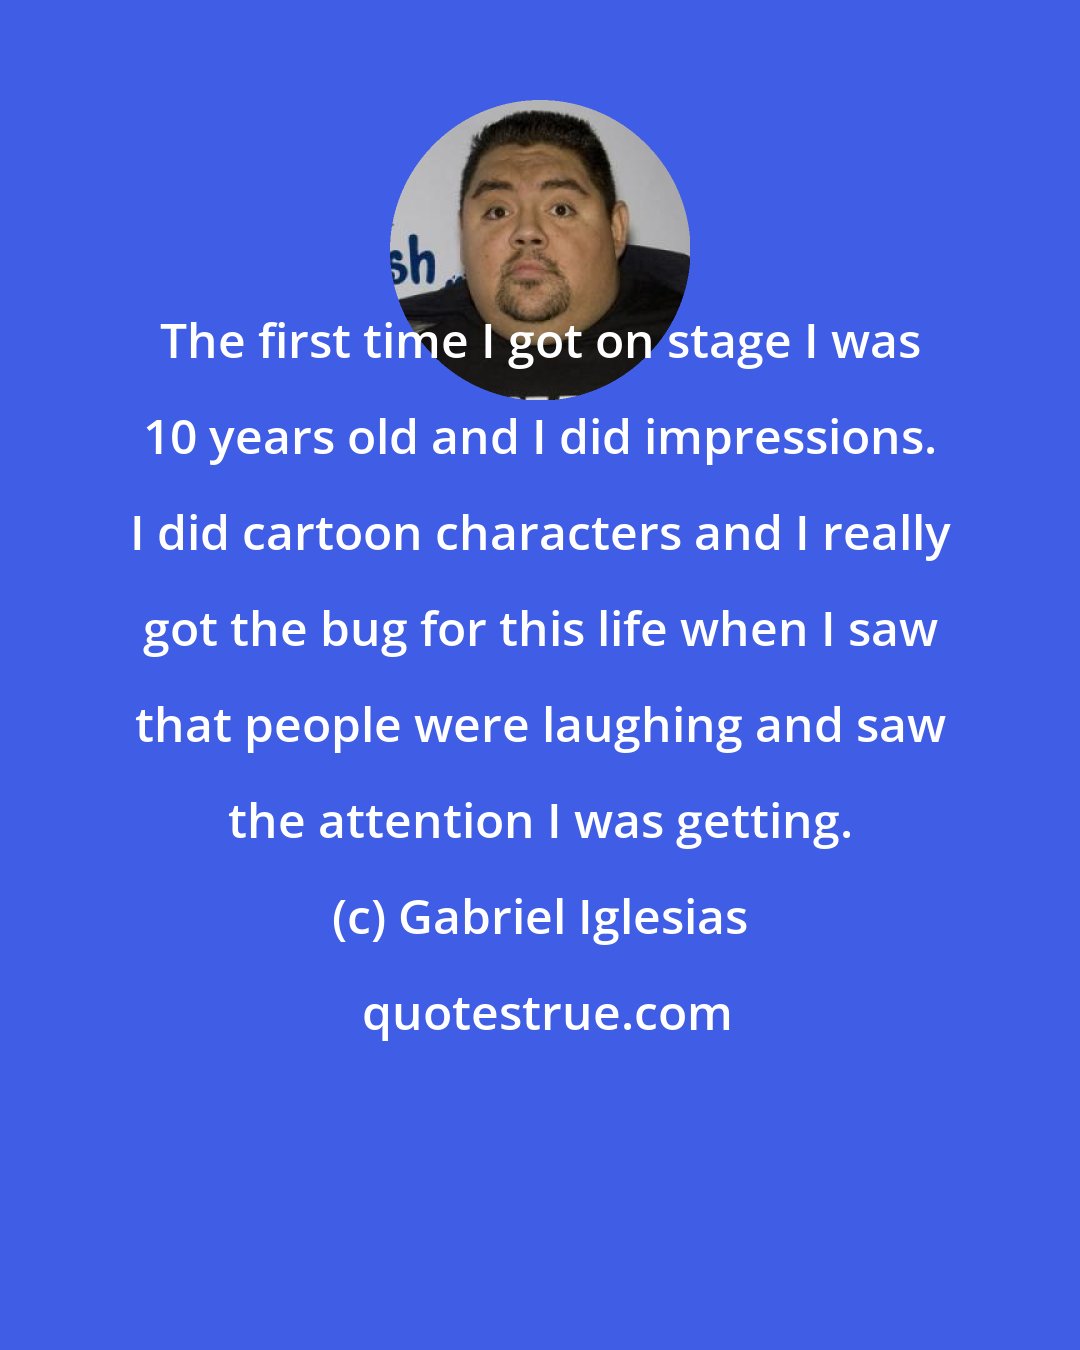 Gabriel Iglesias: The first time I got on stage I was 10 years old and I did impressions. I did cartoon characters and I really got the bug for this life when I saw that people were laughing and saw the attention I was getting.